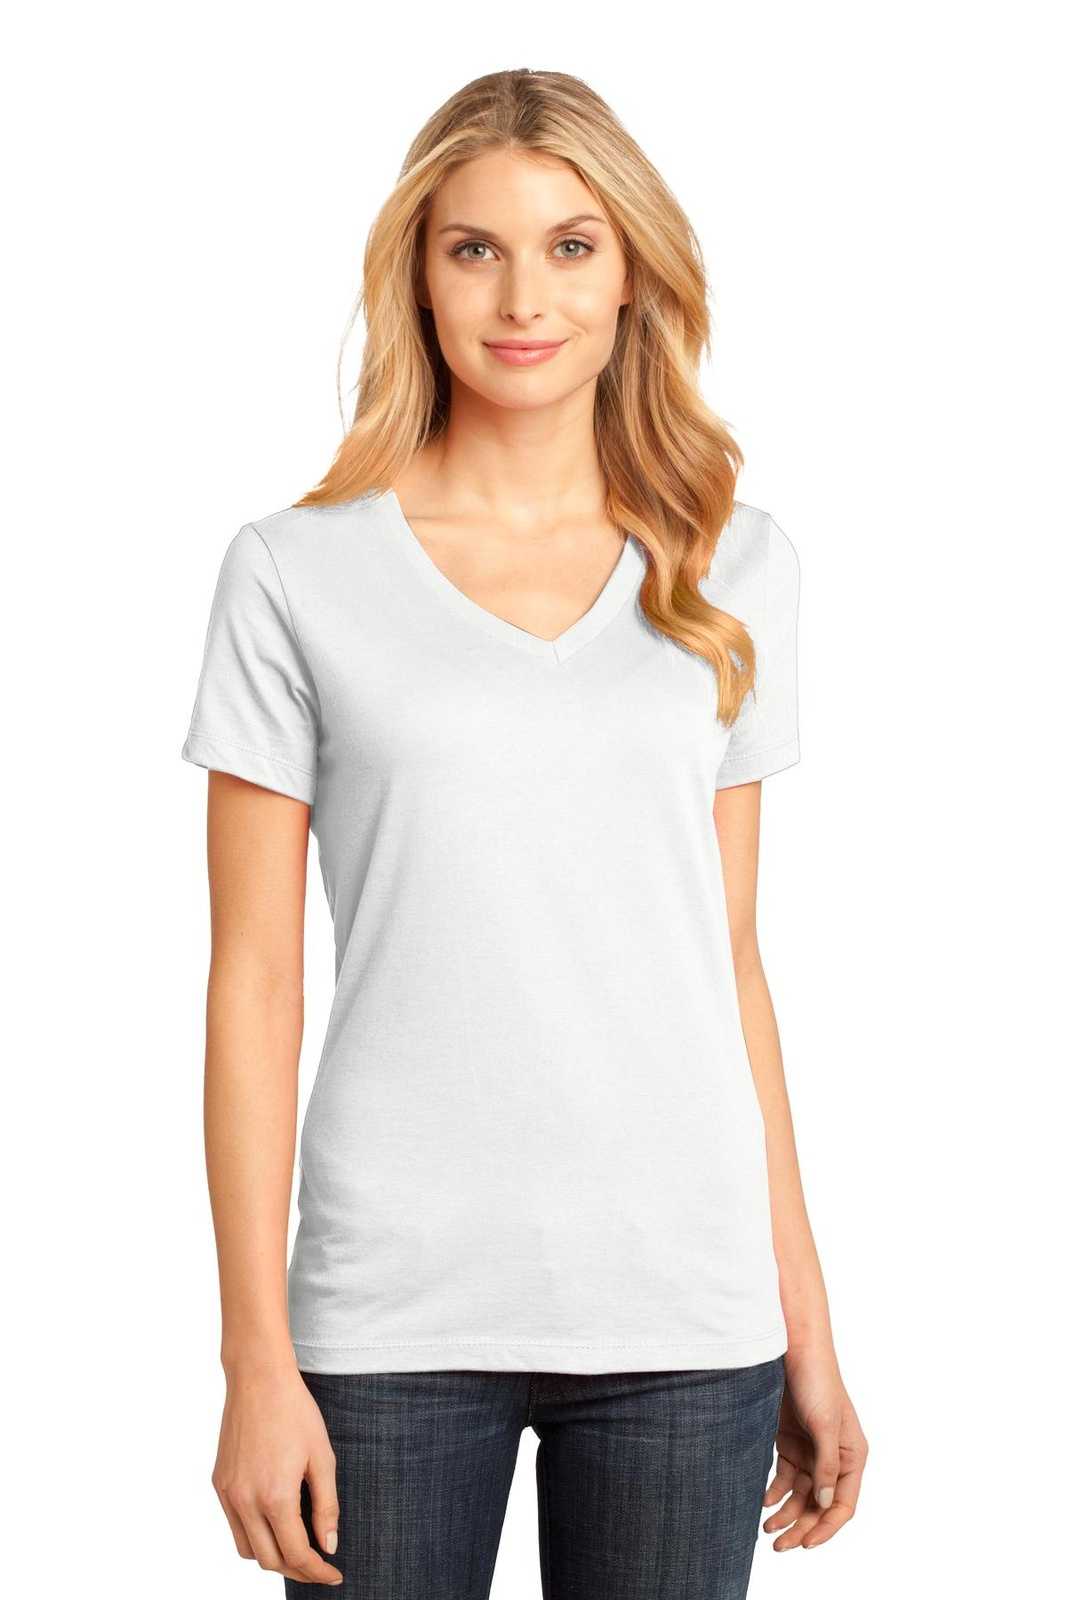 District DM1170L Women's Perfect Weight V-Neck Tee - Bright White - HIT a Double - 1